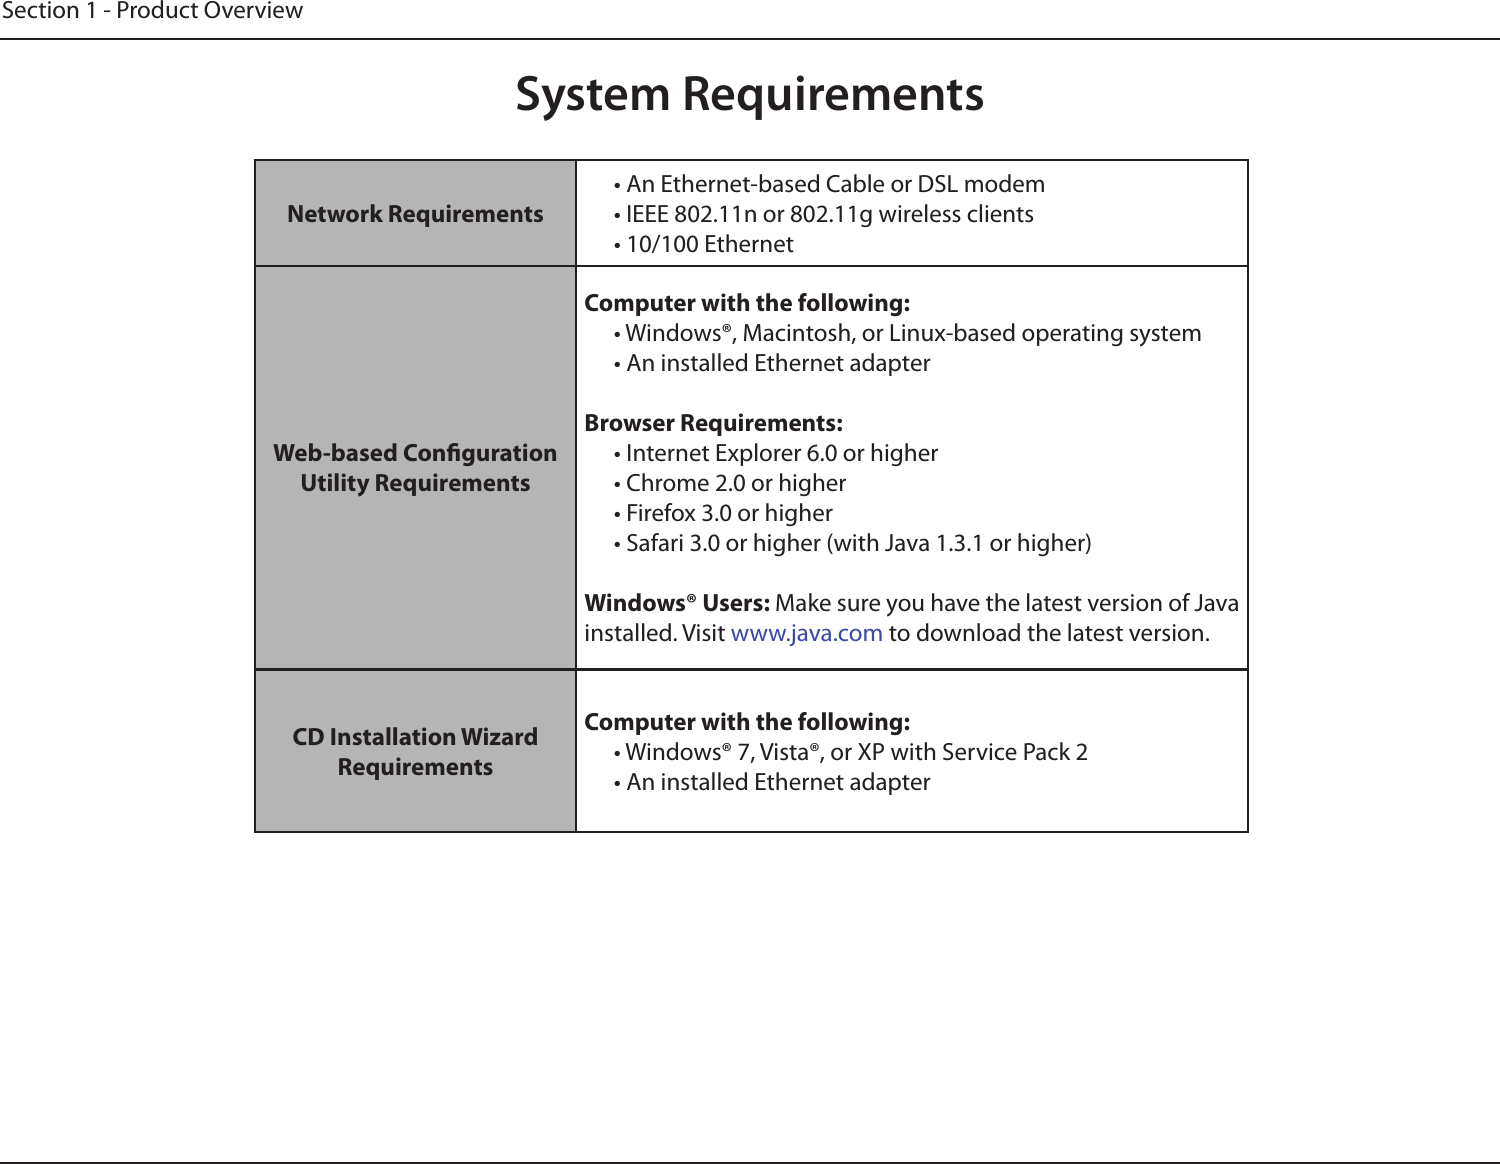 Section 1 - Product OverviewSystem RequirementsNetwork Requirements• An Ethernet-based Cable or DSL modem• IEEE 802.11n or 802.11g wireless clients• 10/100 EthernetWeb-based Conguration Utility RequirementsComputer with the following:• Windows®, Macintosh, or Linux-based operating system • An installed Ethernet adapterBrowser Requirements:• Internet Explorer 6.0 or higher• Chrome 2.0 or higher• Firefox 3.0 or higher• Safari 3.0 or higher (with Java 1.3.1 or higher) Windows® Users: Make sure you have the latest version of Java installed. Visit www.java.com to download the latest version.CD Installation Wizard RequirementsComputer with the following:• Windows® 7, Vista®, or XP with Service Pack 2• An installed Ethernet adapter